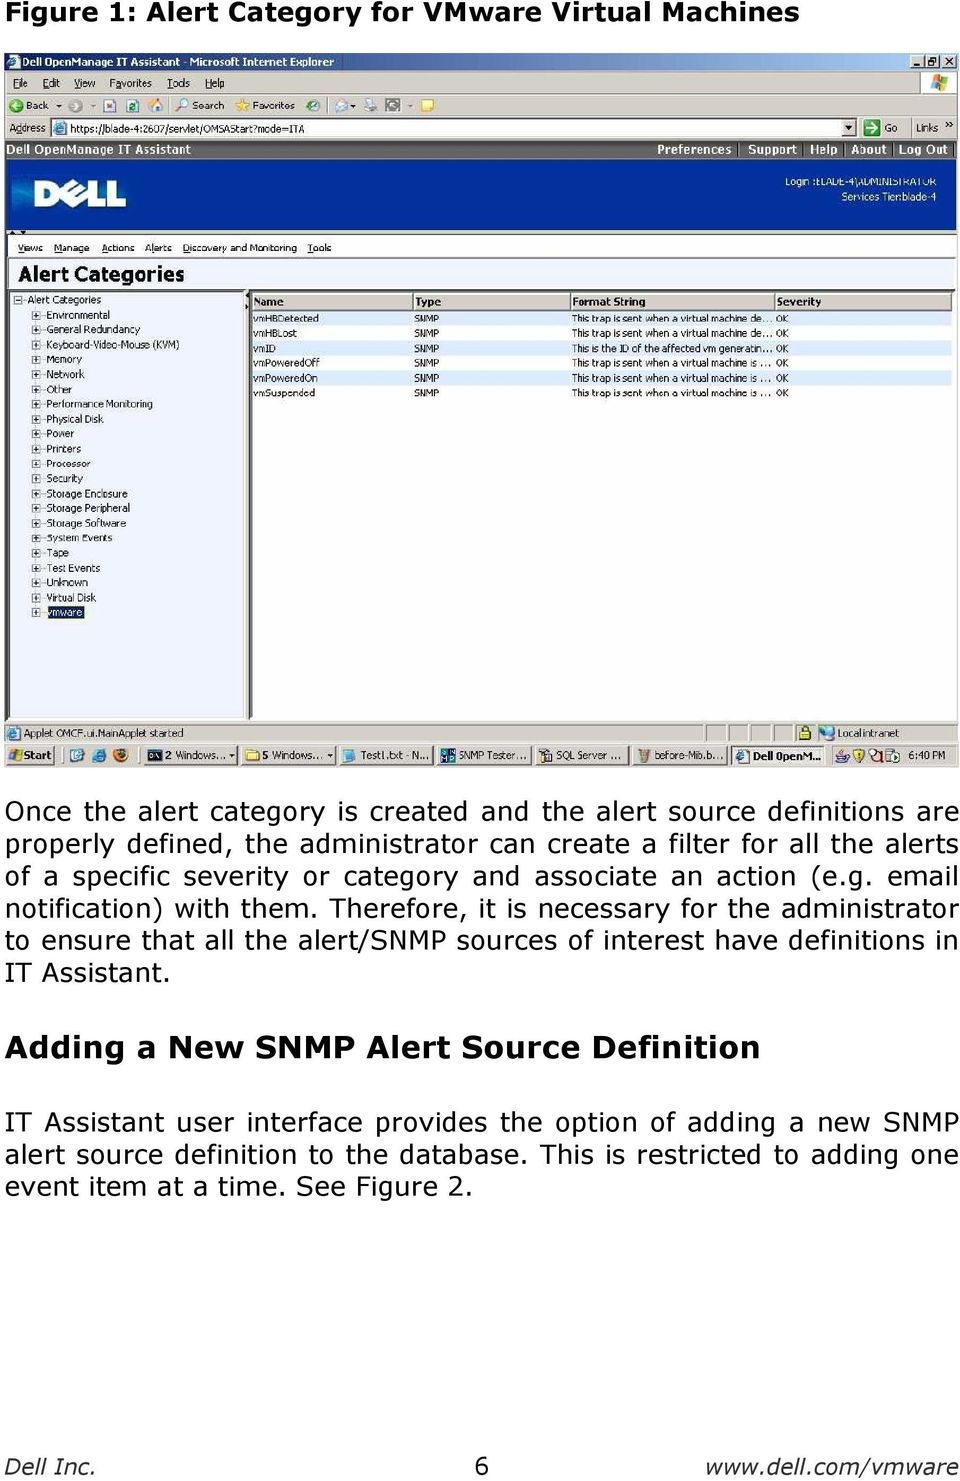 Therefore, it is necessary for the administrator to ensure that all the alert/snmp sources of interest have definitions in IT Assistant.